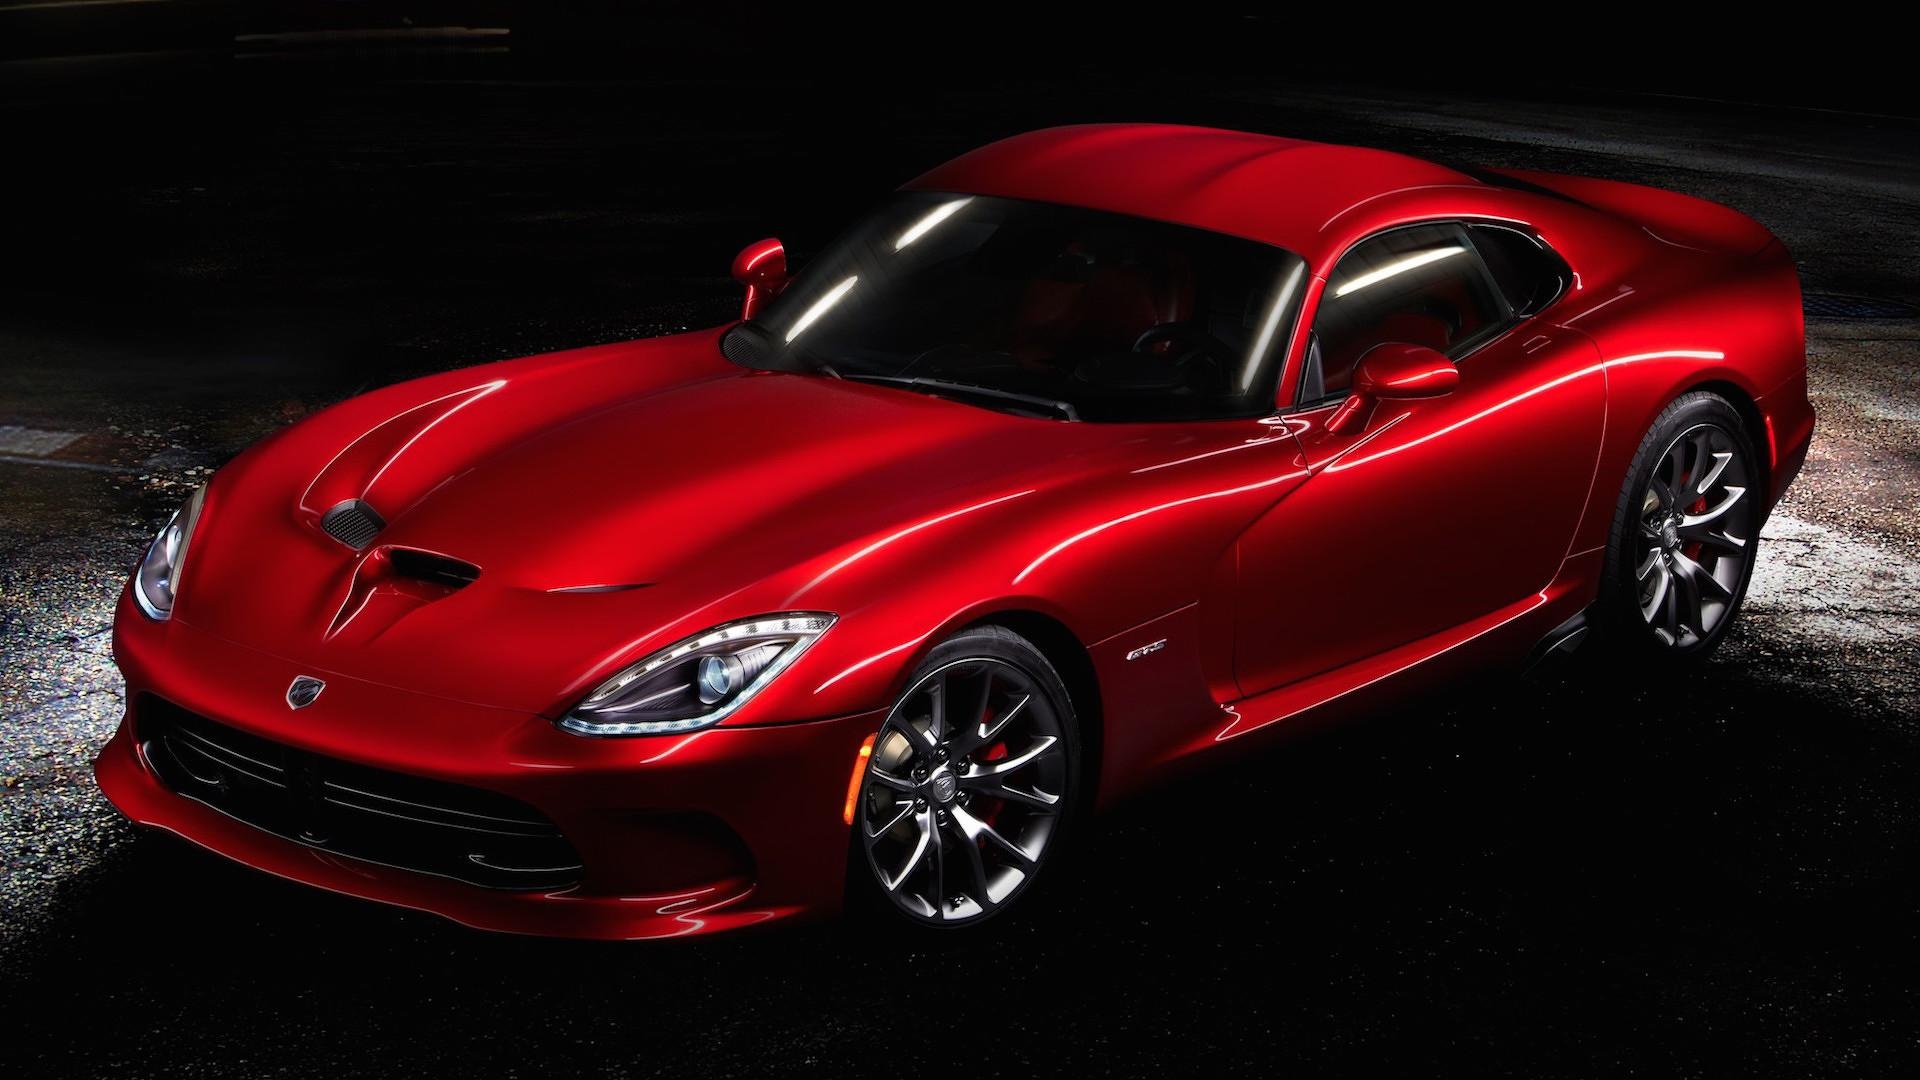 Dodge Viper, Exciting news, Performance tests, Unmatched power, 1920x1080 Full HD Desktop